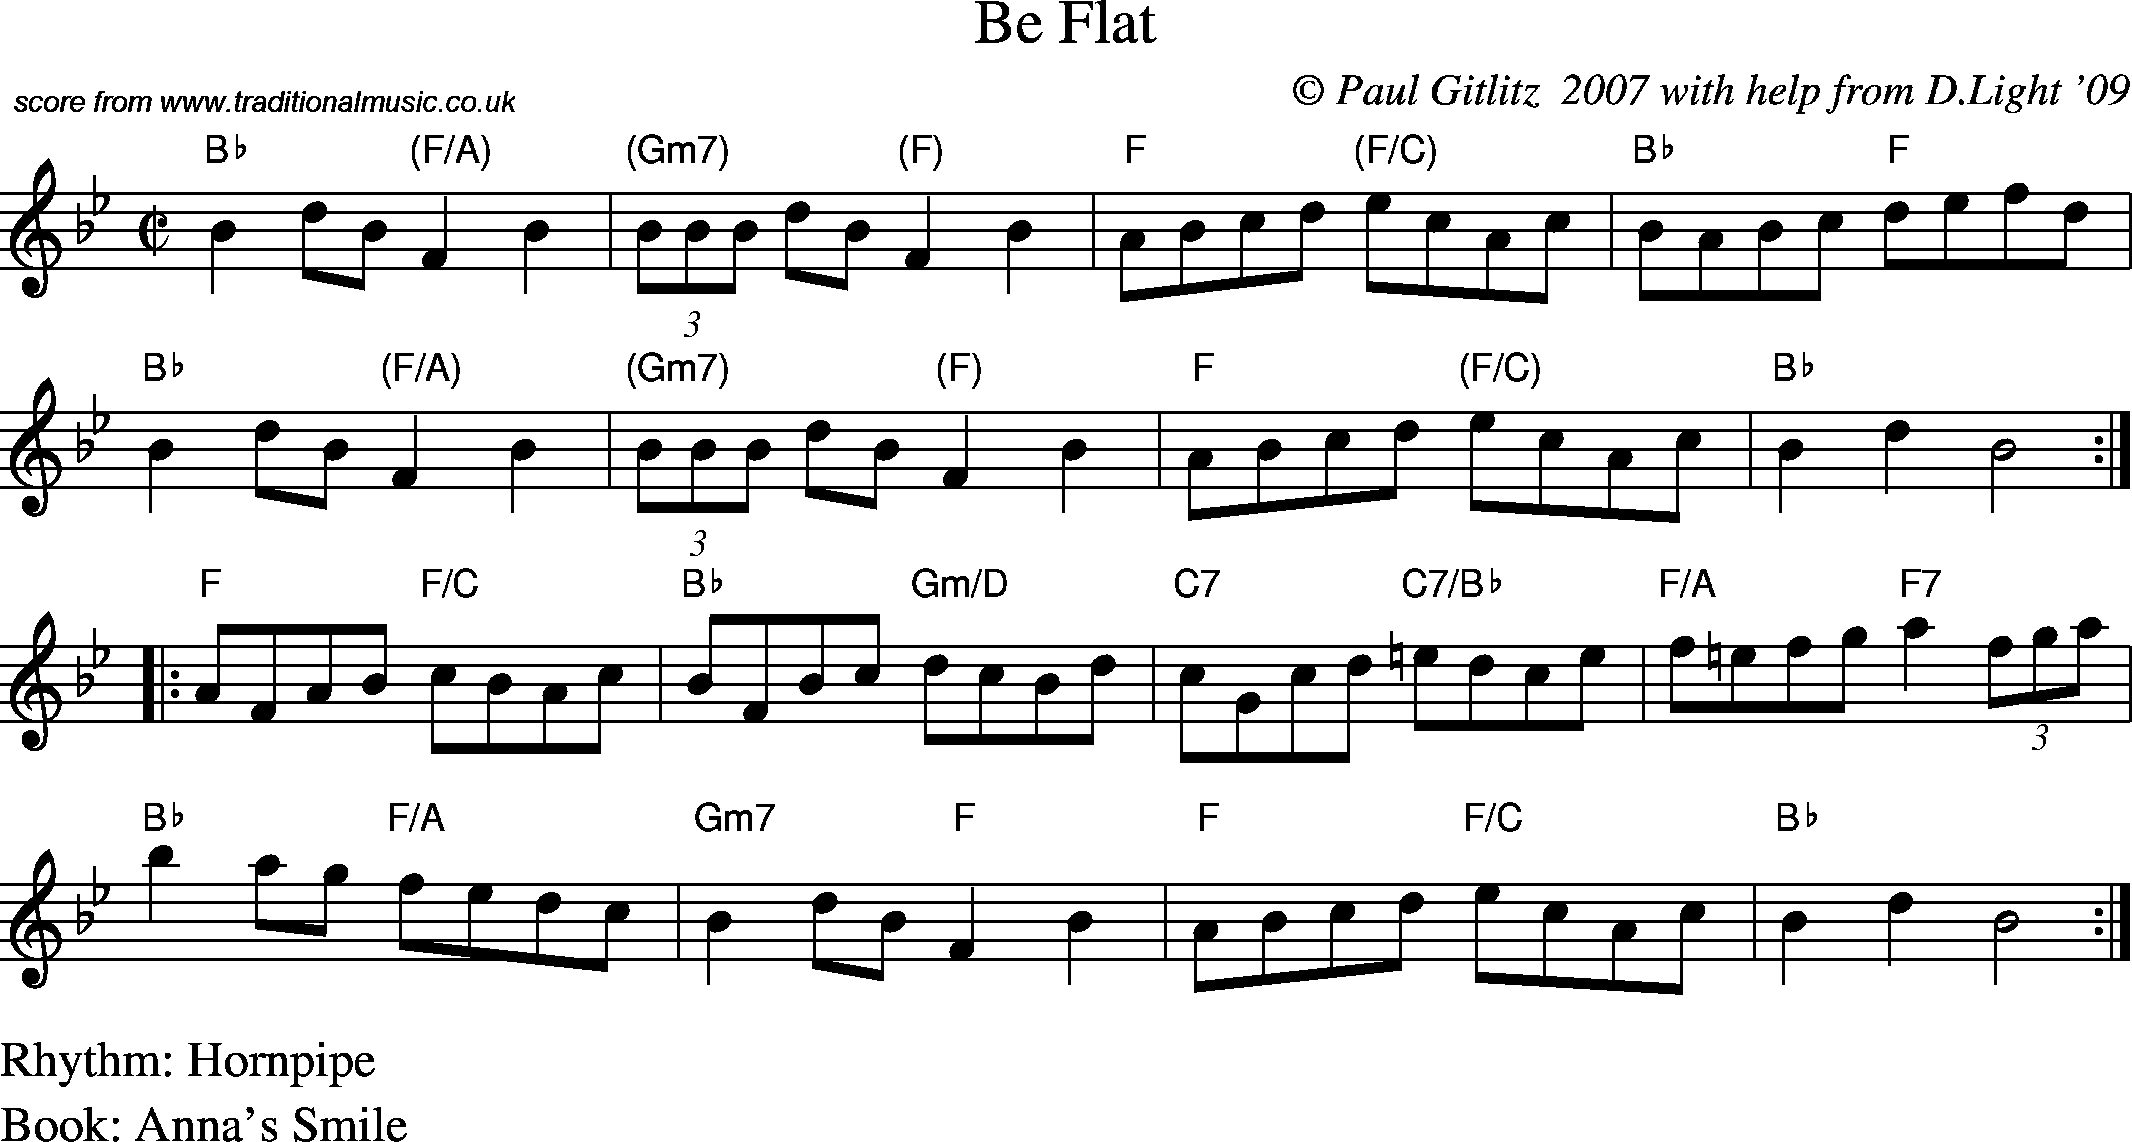 Sheet Music Score for Hornpipe/Strathspey - Be Flat